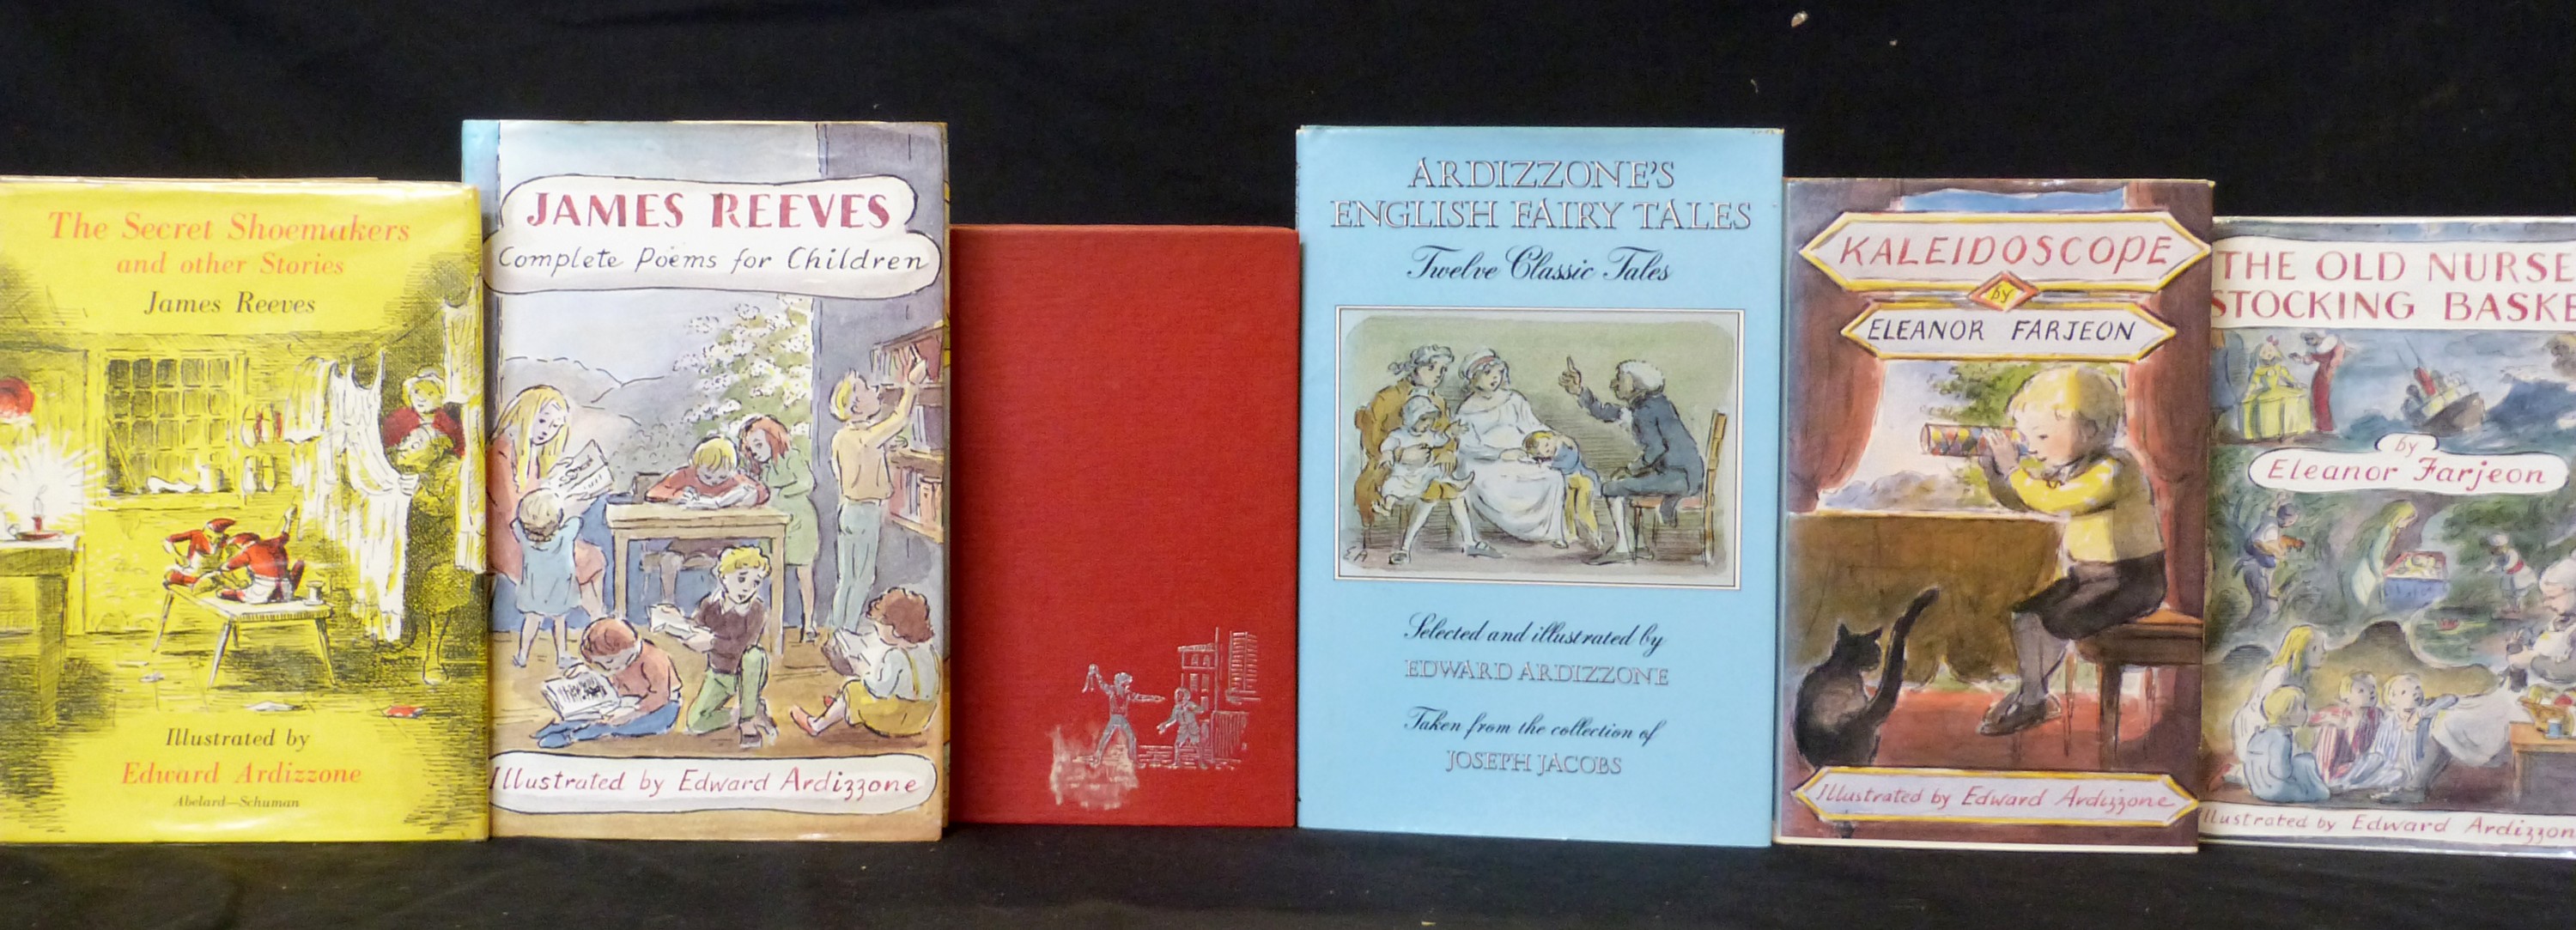 JAMES REEVES: THE JAMES REEVES STORY BOOK, ill Edward Ardizzone, London, Books for Children by - Image 2 of 3